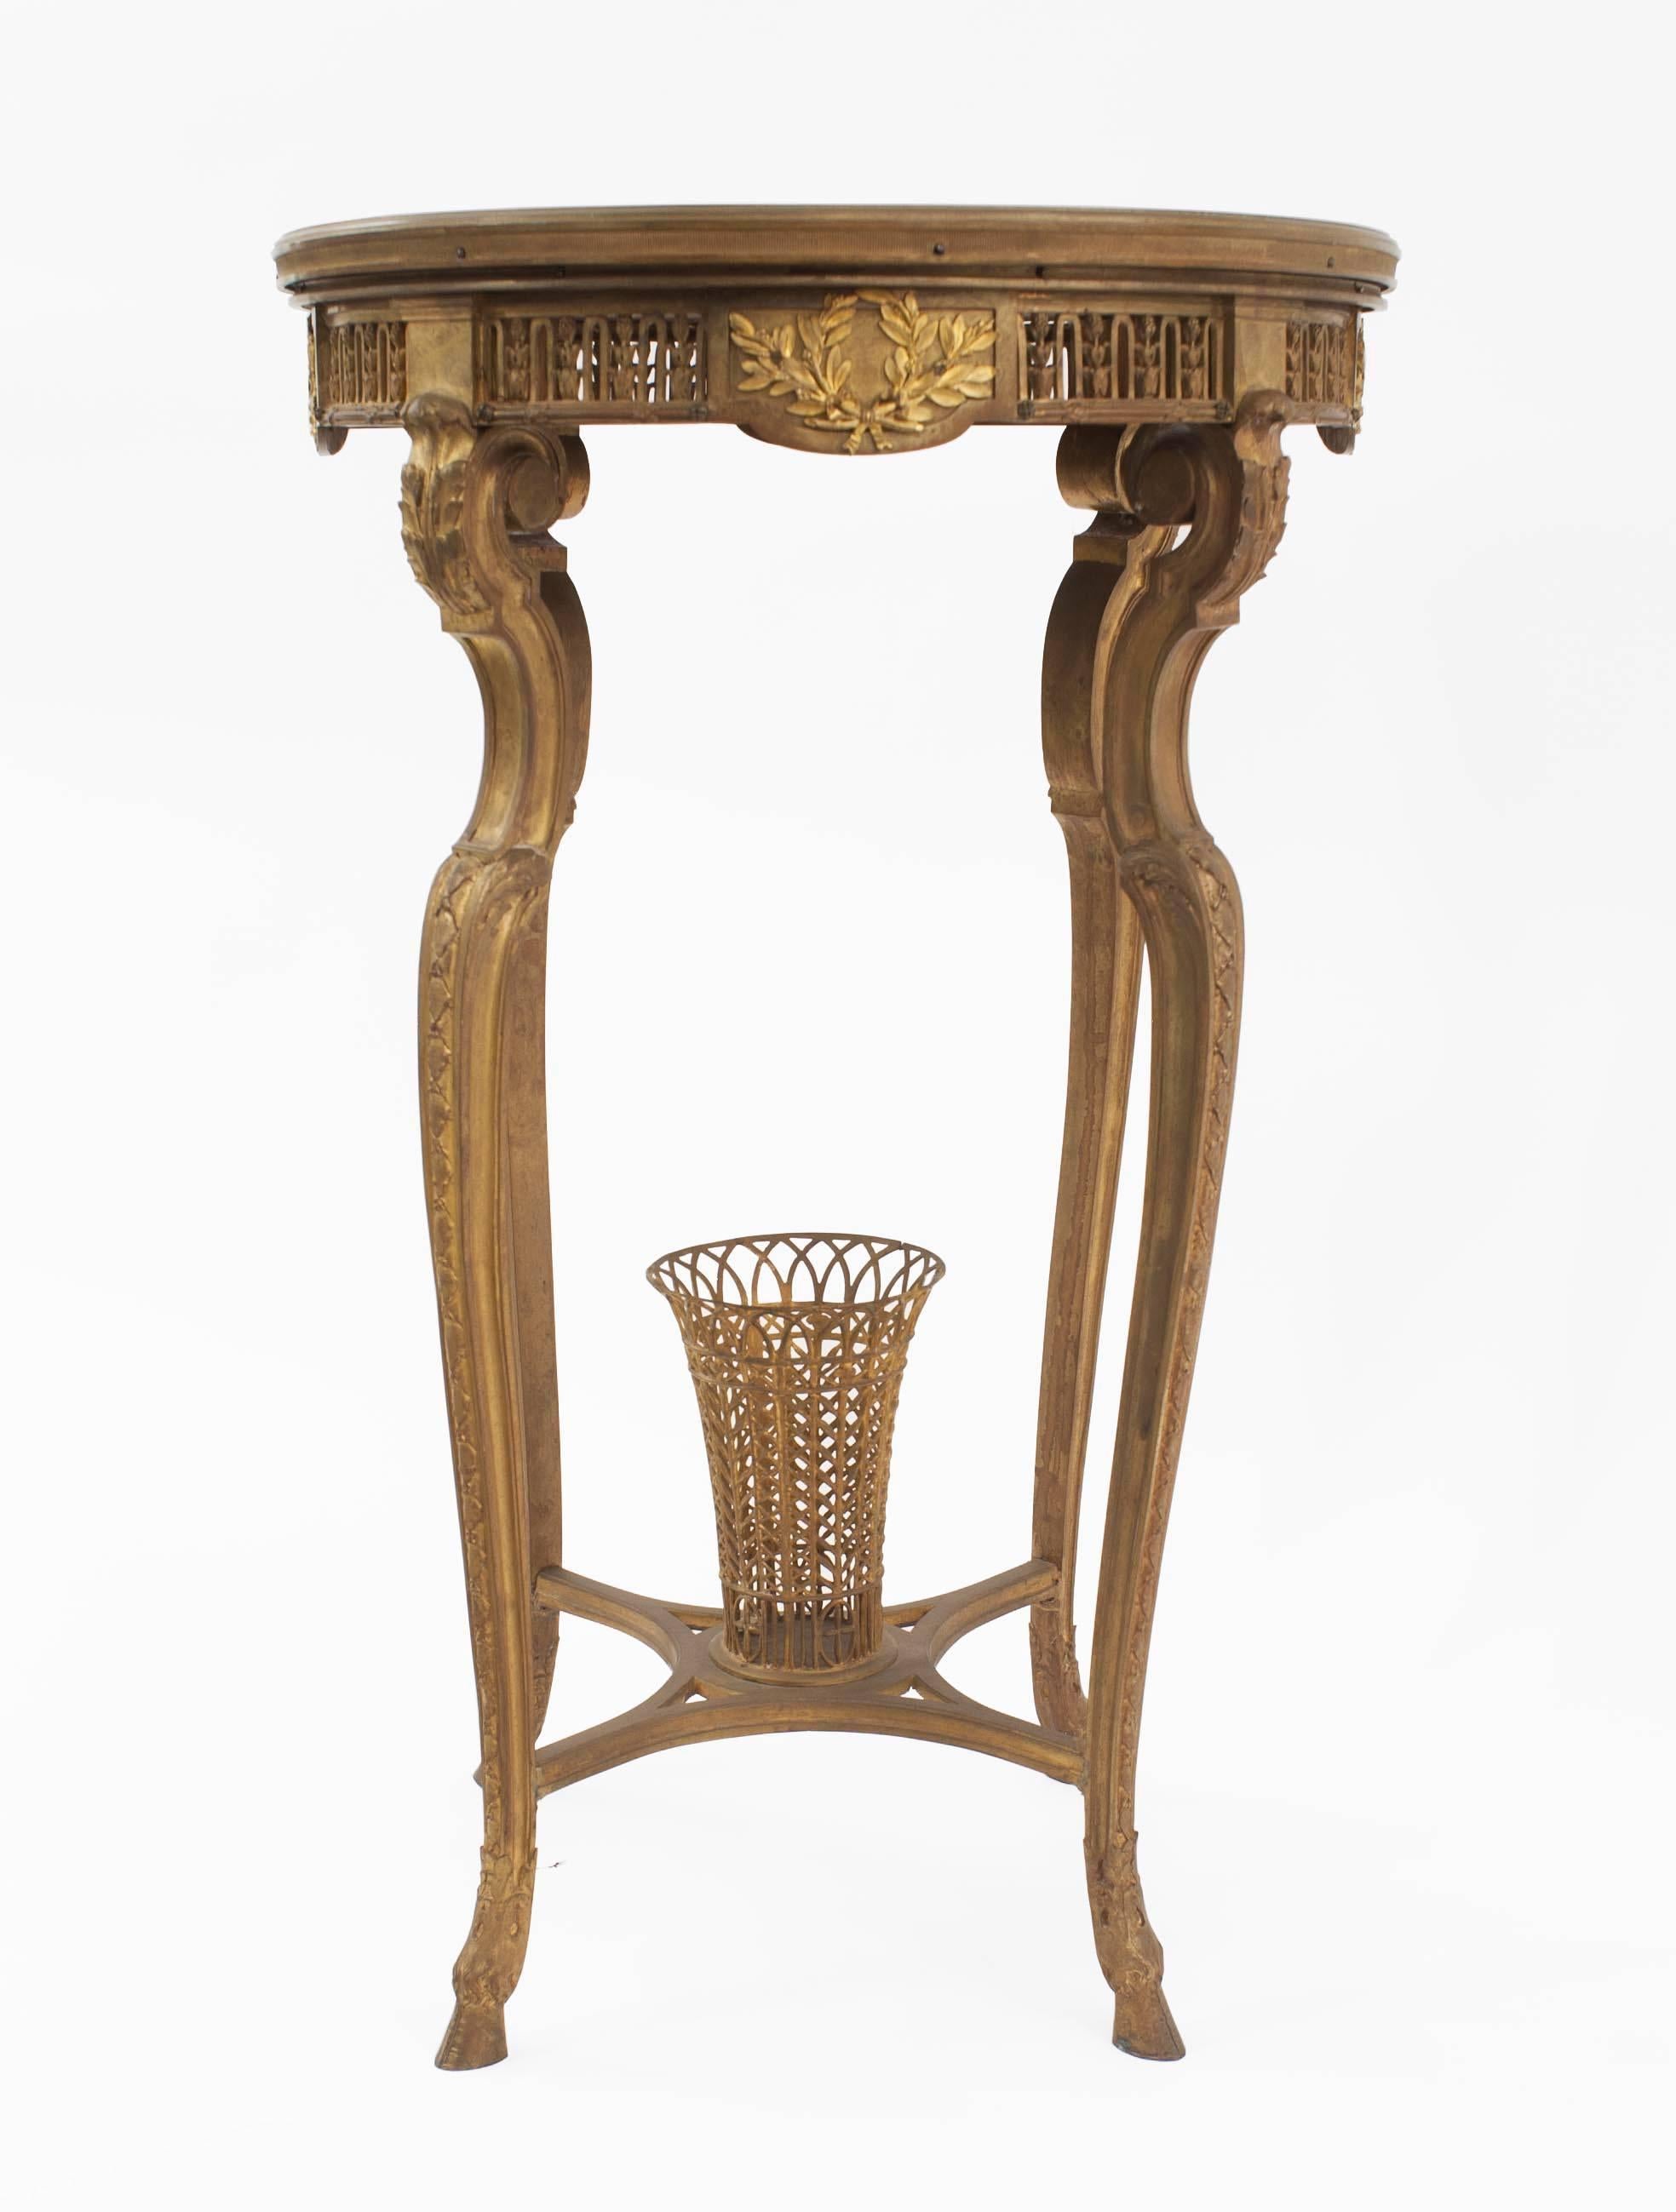 French R√©gence-style (19th Century) round bronze dore end table with basket stretcher and marble top.
